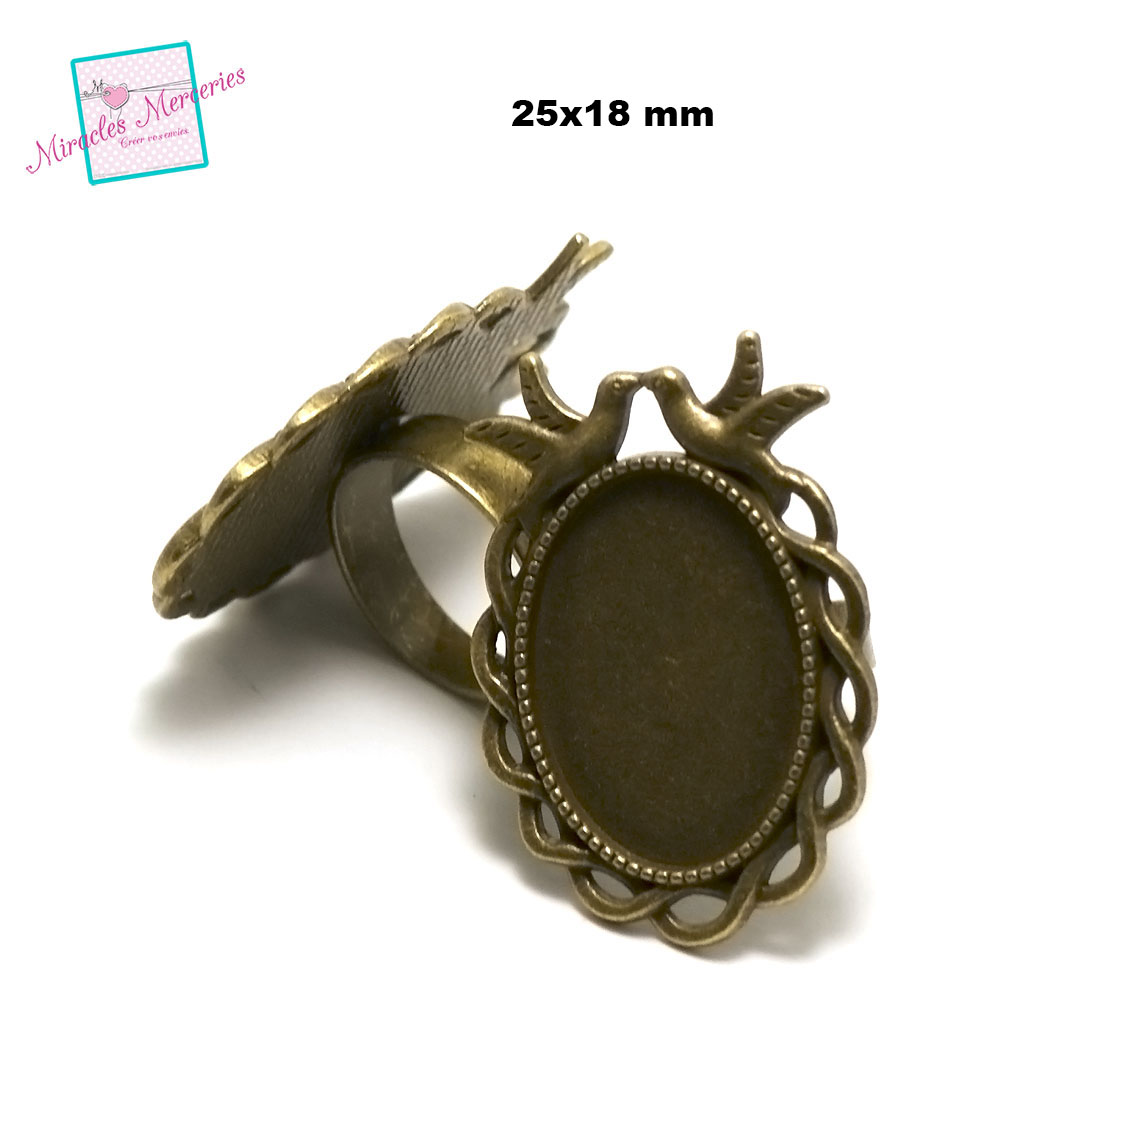 2 supports cabochons bague 25x18 mm ovale 010 double colombes,bronze